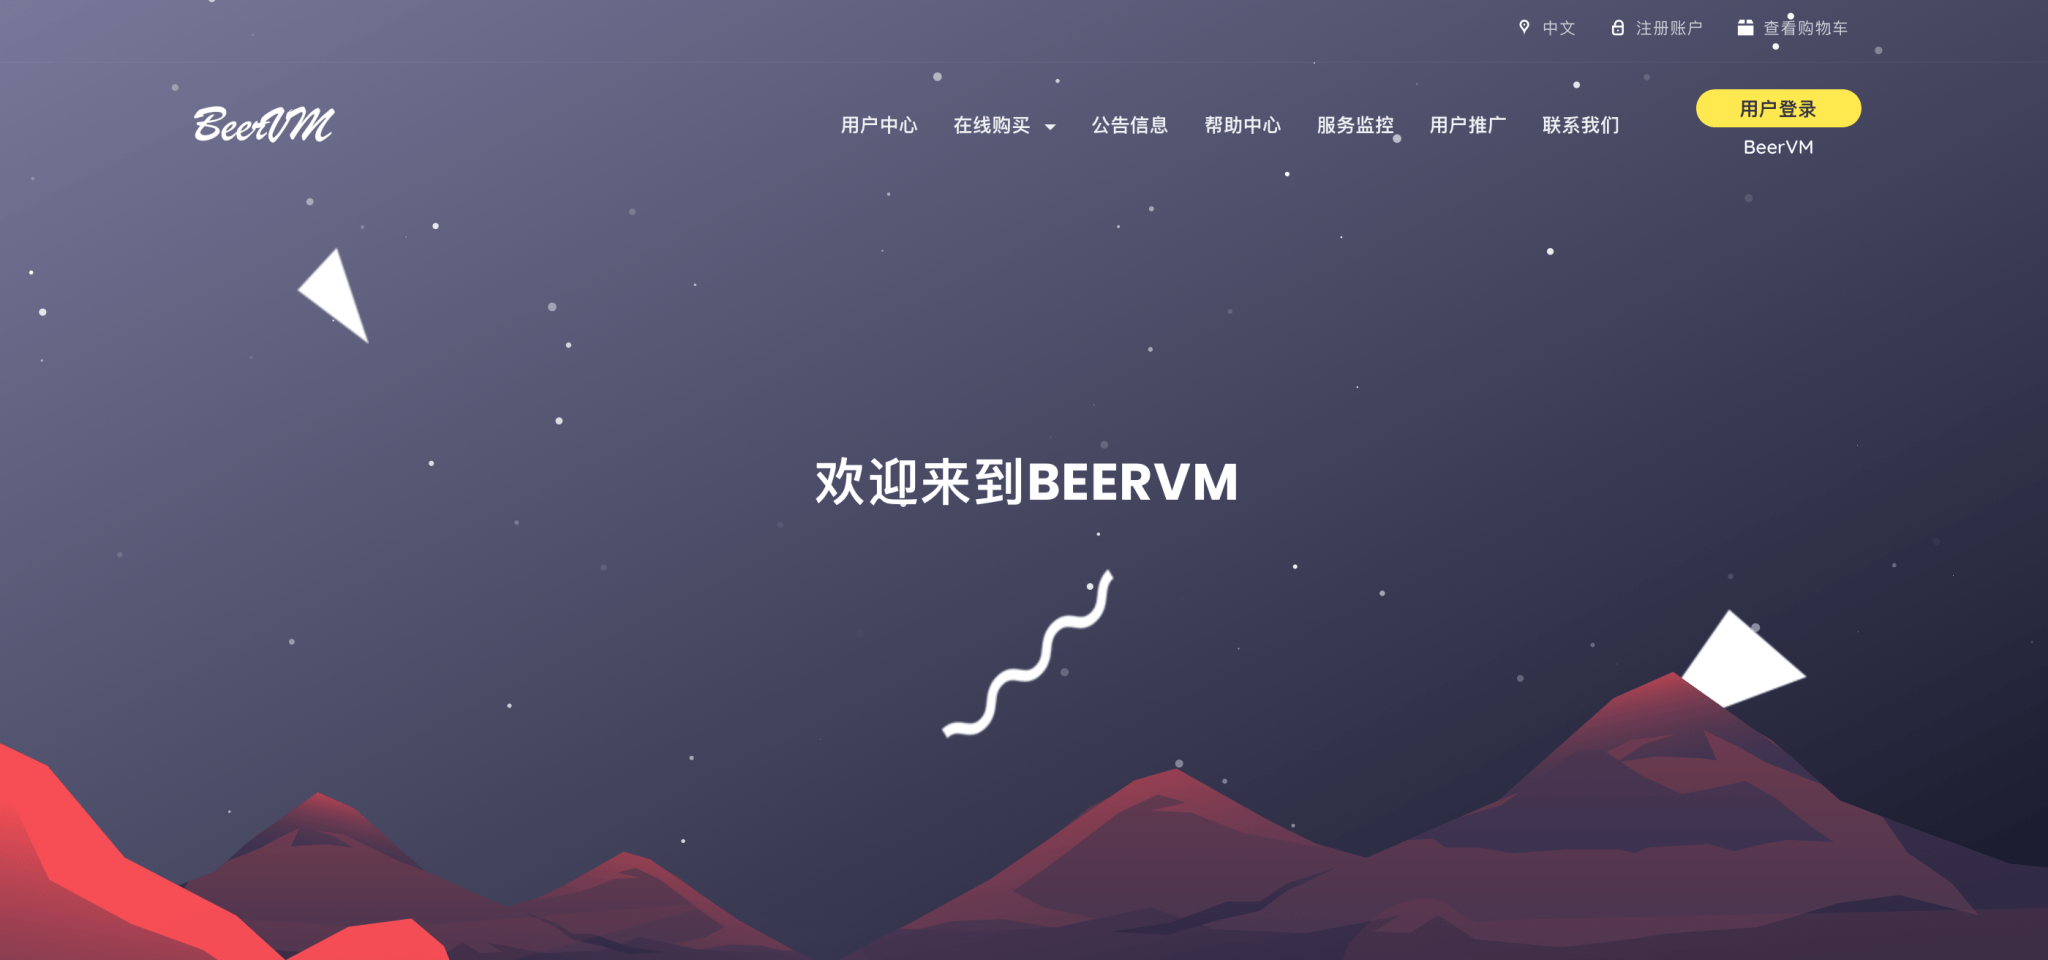 BeerVM 首页